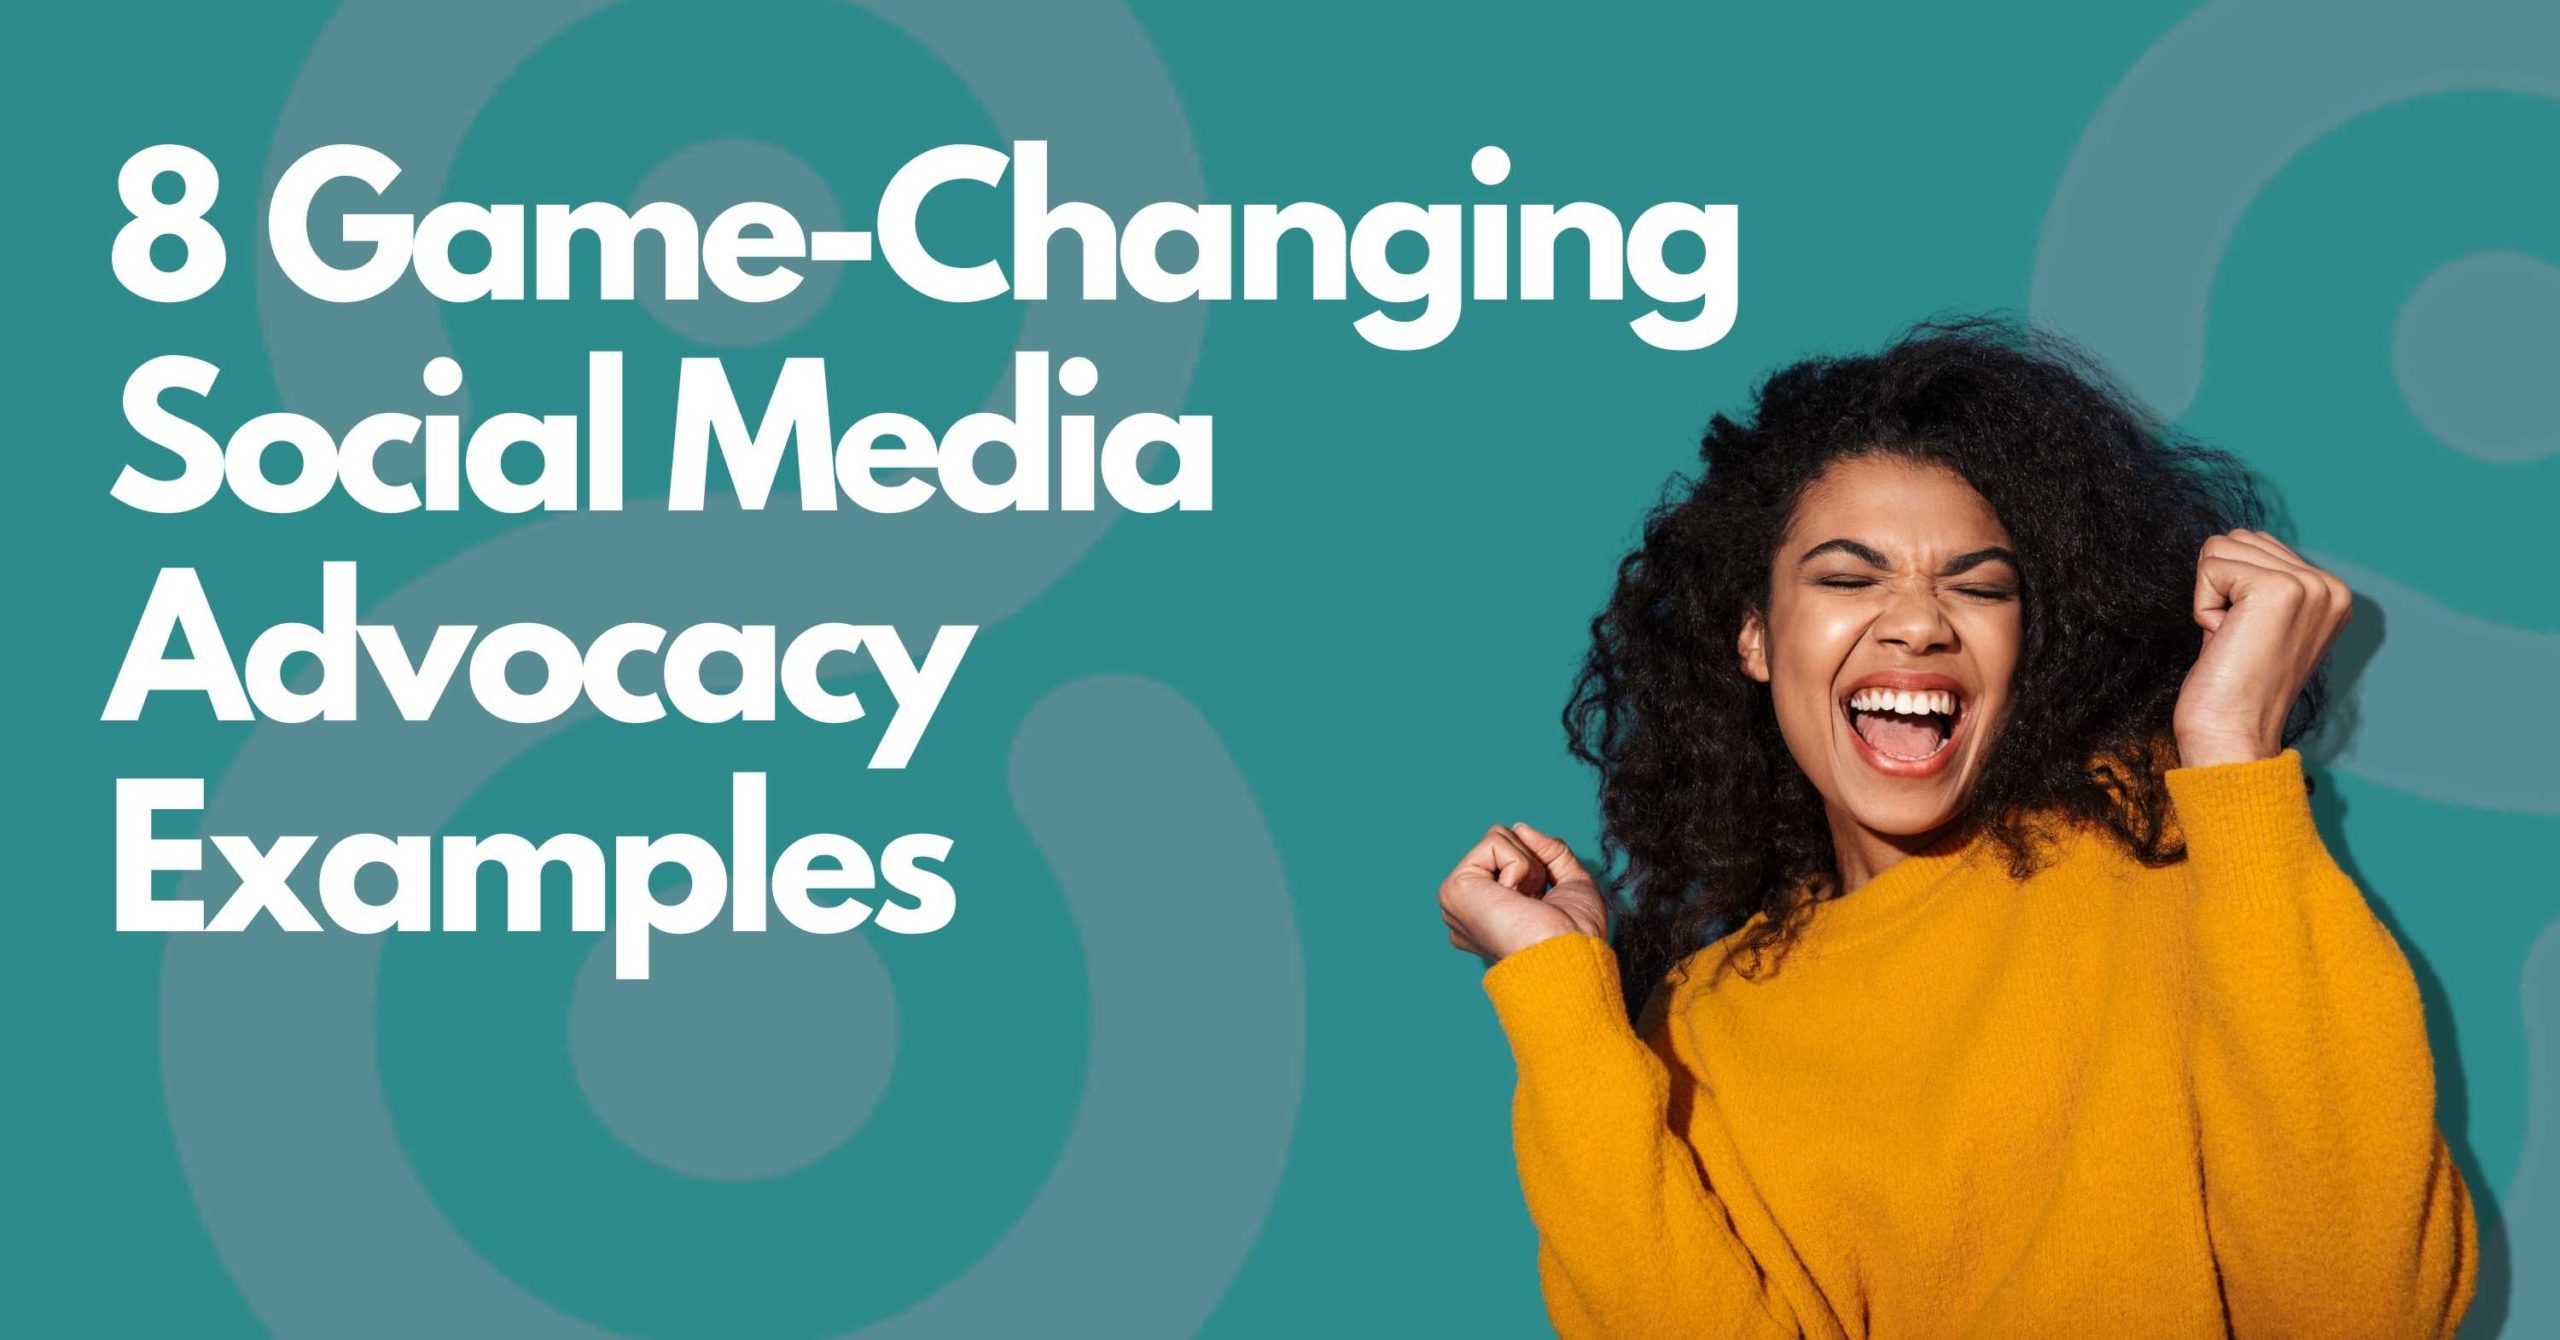 8 Game-Changing Social Media Advocacy Examples